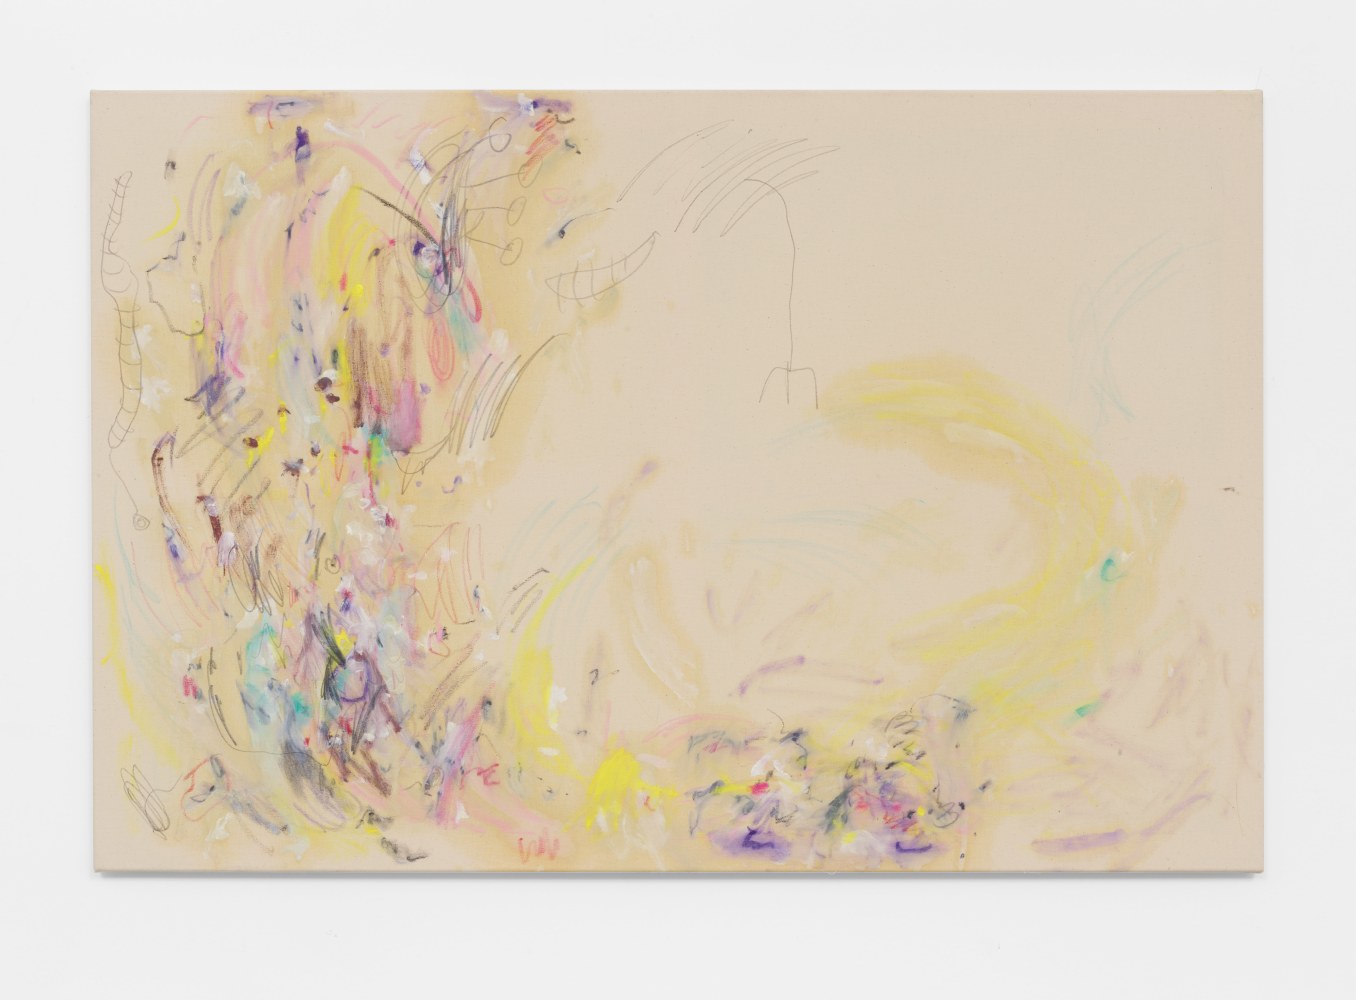 Flora Hauser
Crossing Online, 2022
Pencils and oil on canvas
31.50h x 47.24w in
80h x 120w cm